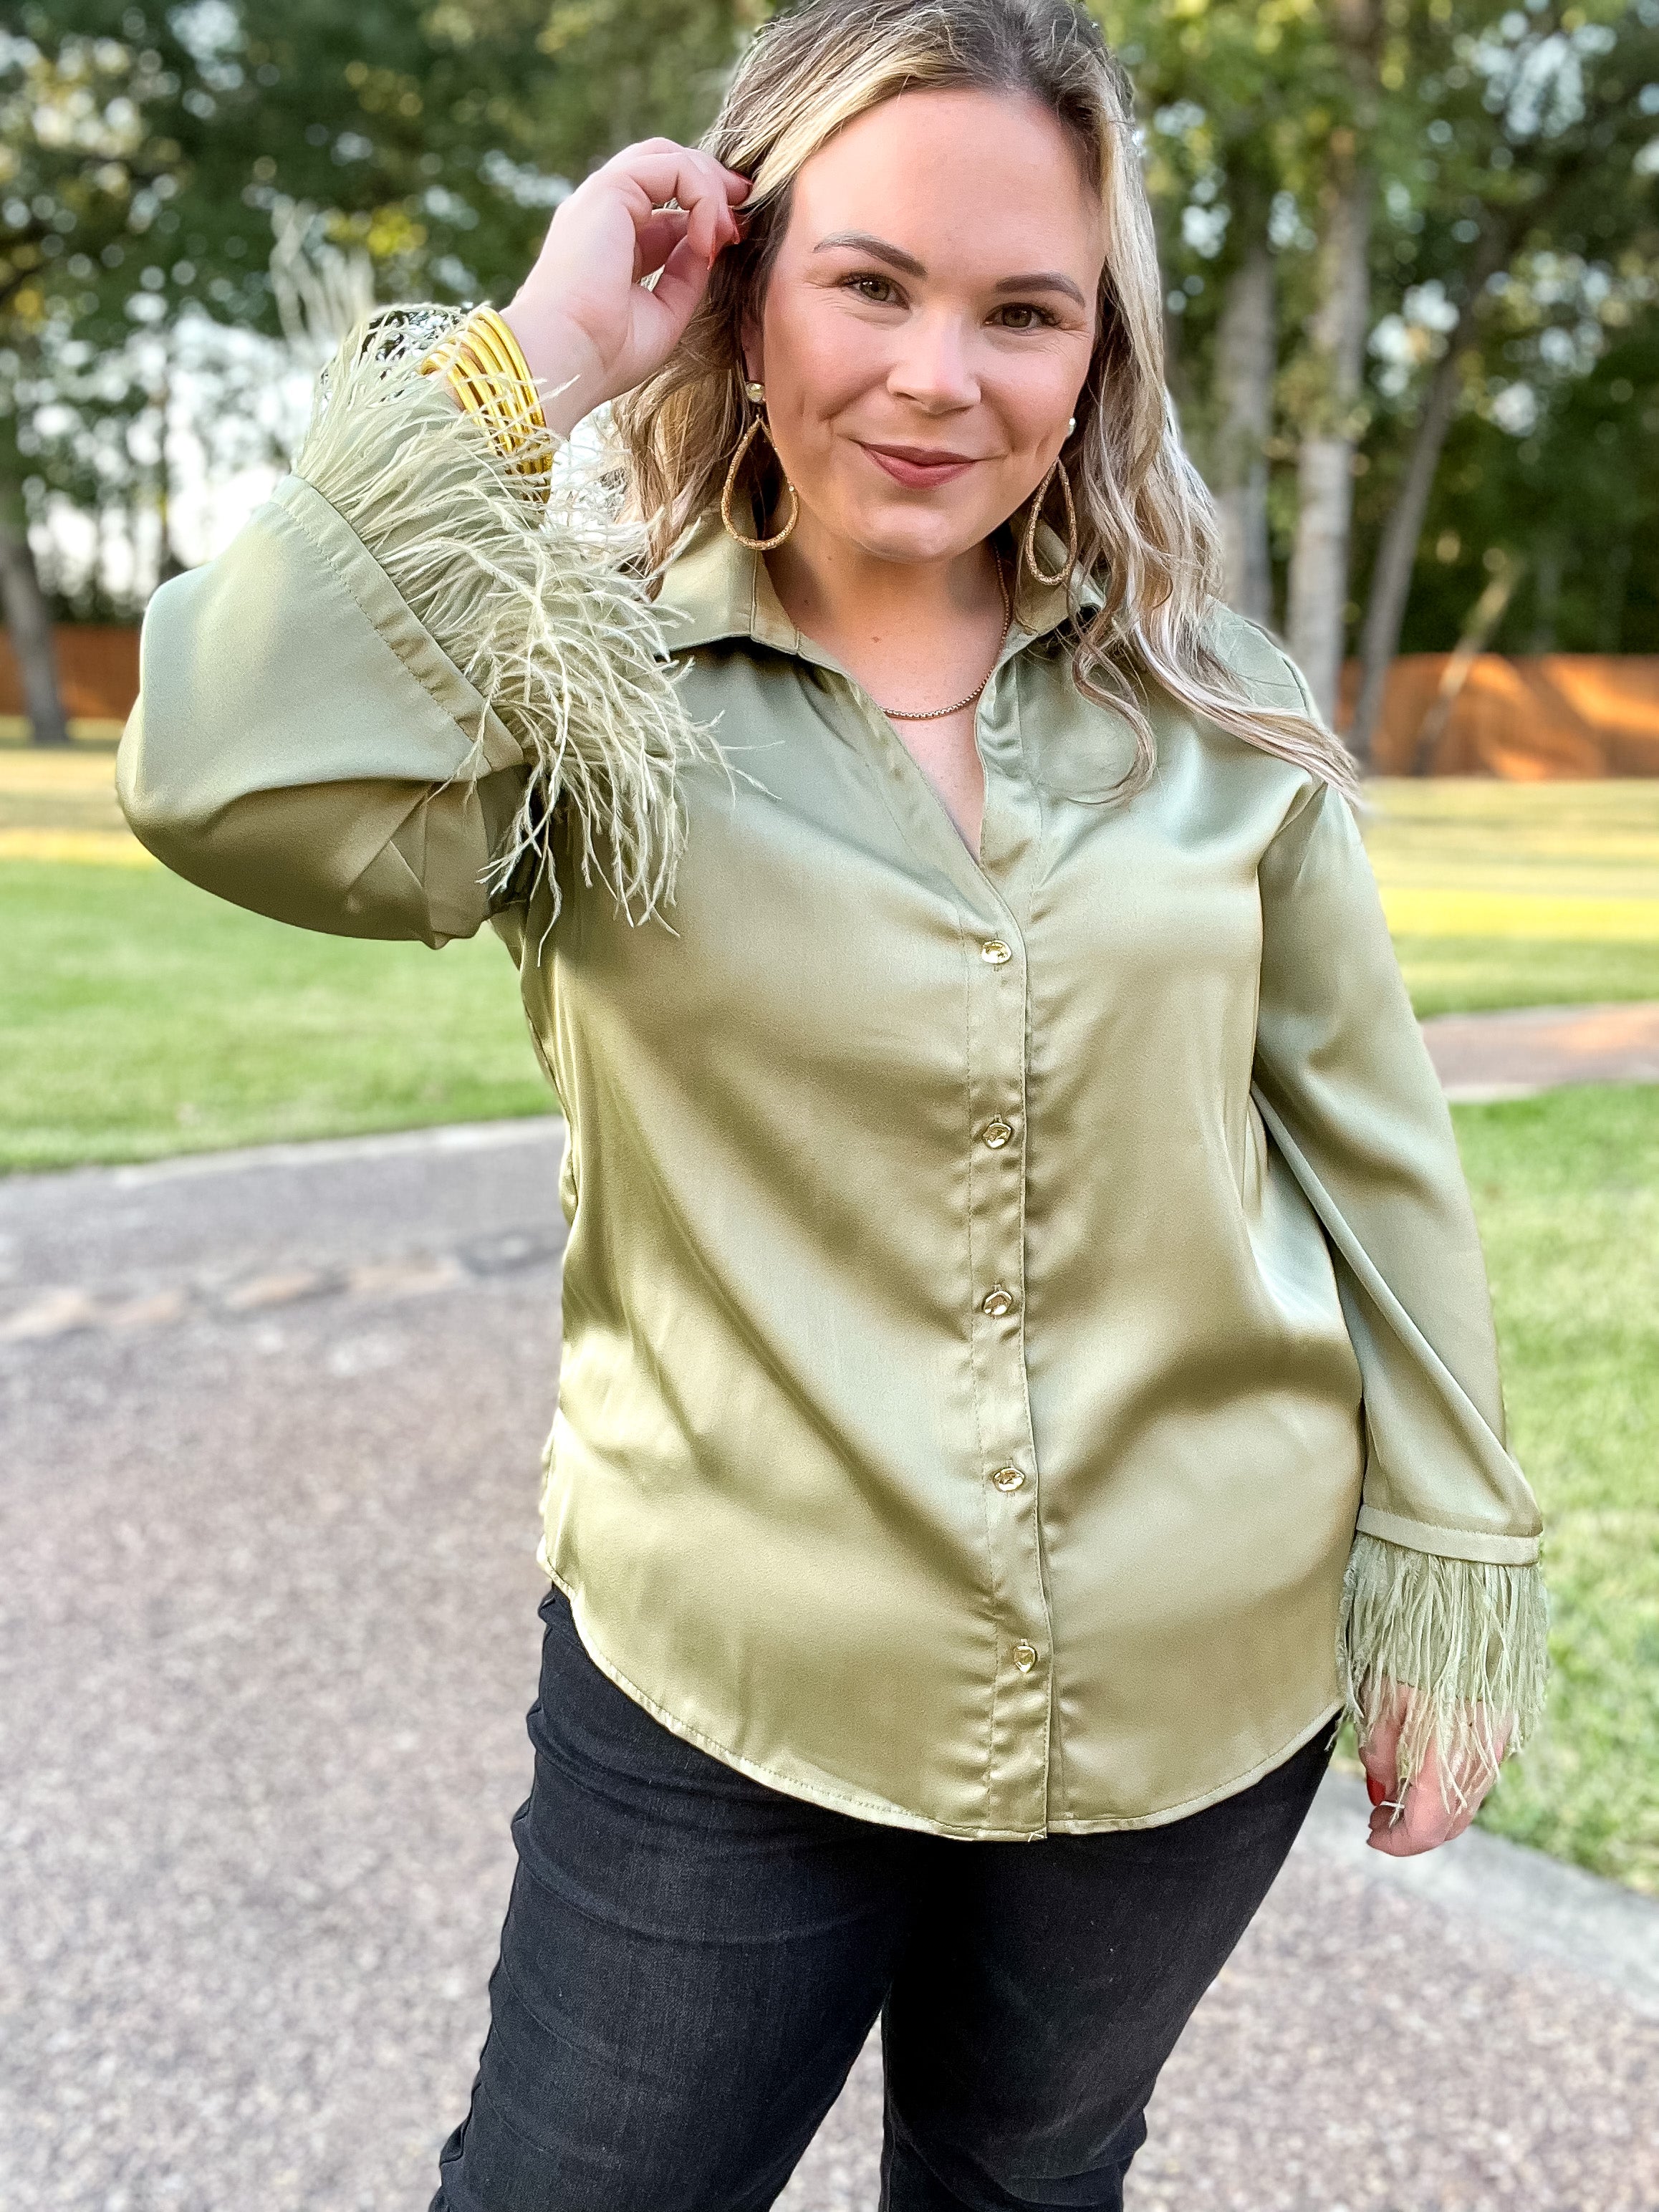 Take a Chance Satin Button Up Top with Feather Trim Long Sleeves in Olive Green - Giddy Up Glamour Boutique